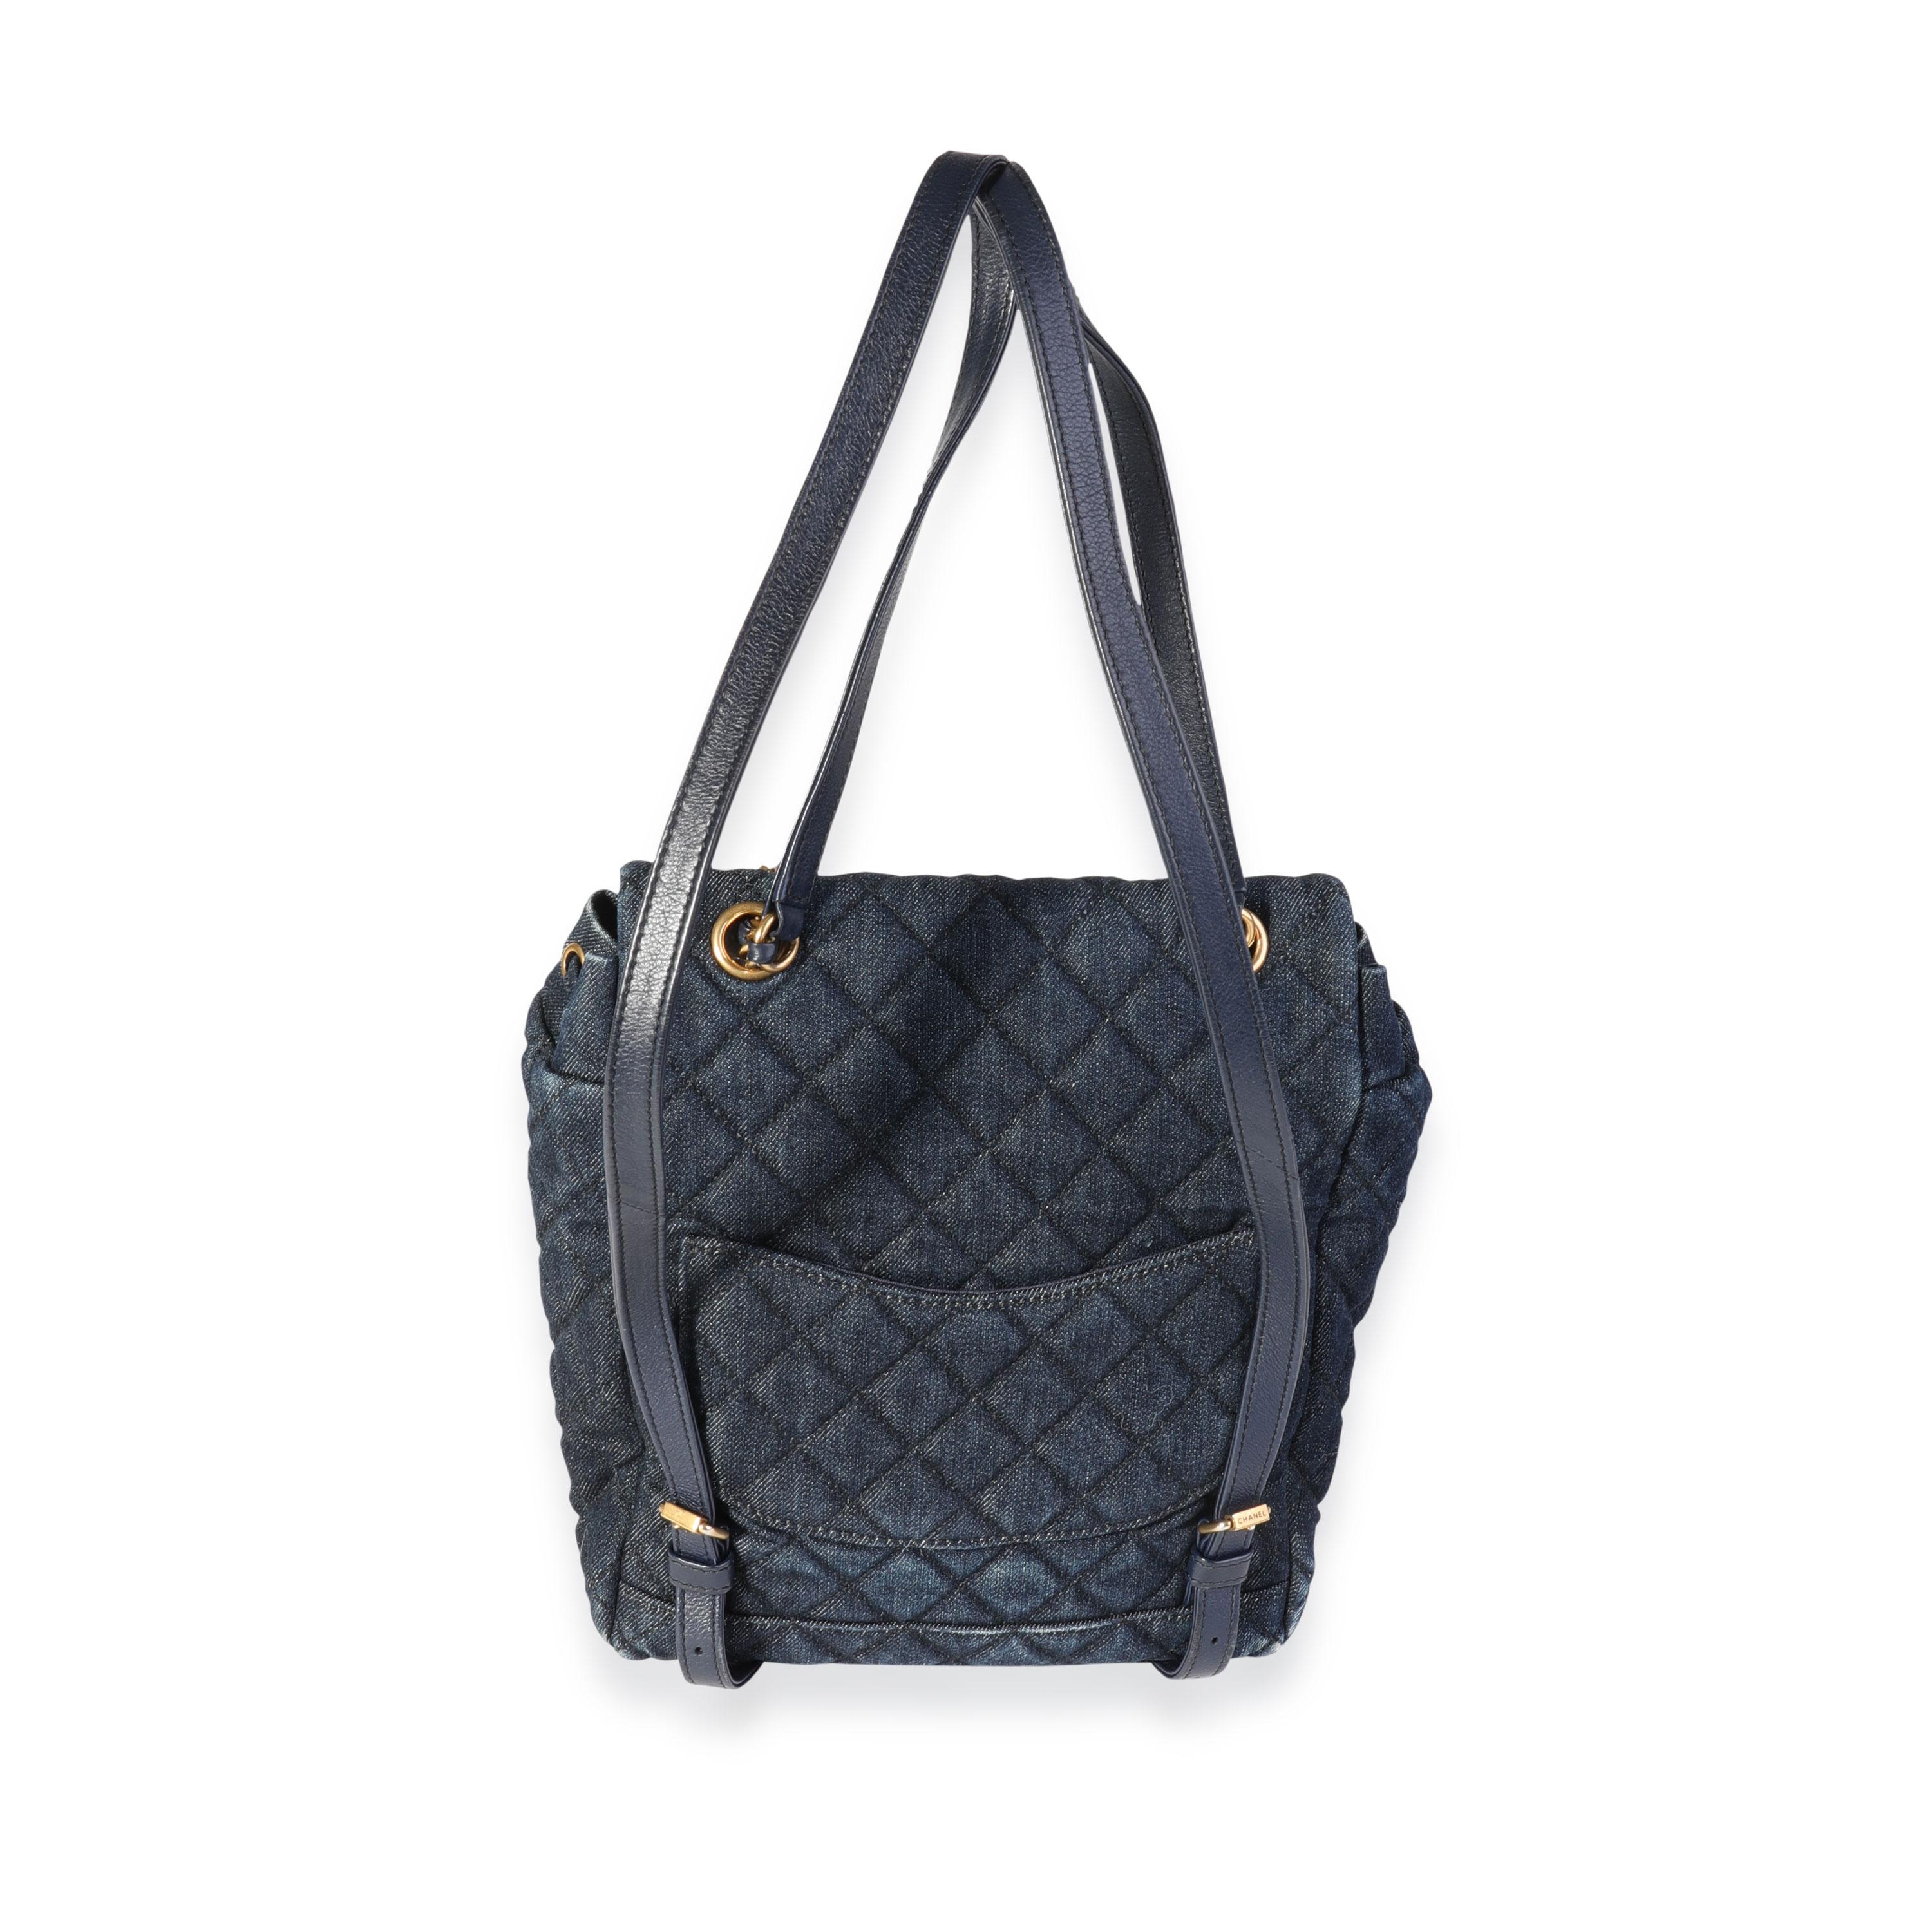 Listing Title: Chanel Blue Denim Urban Spirit Backpack
SKU: 118984
Condition: Pre-owned (3000)
Handbag Condition: Very Good
Condition Comments: Wear to bottom corners. Stains on interior.
Brand: Chanel
Model: Urban Spirit Backpack
Origin Country: